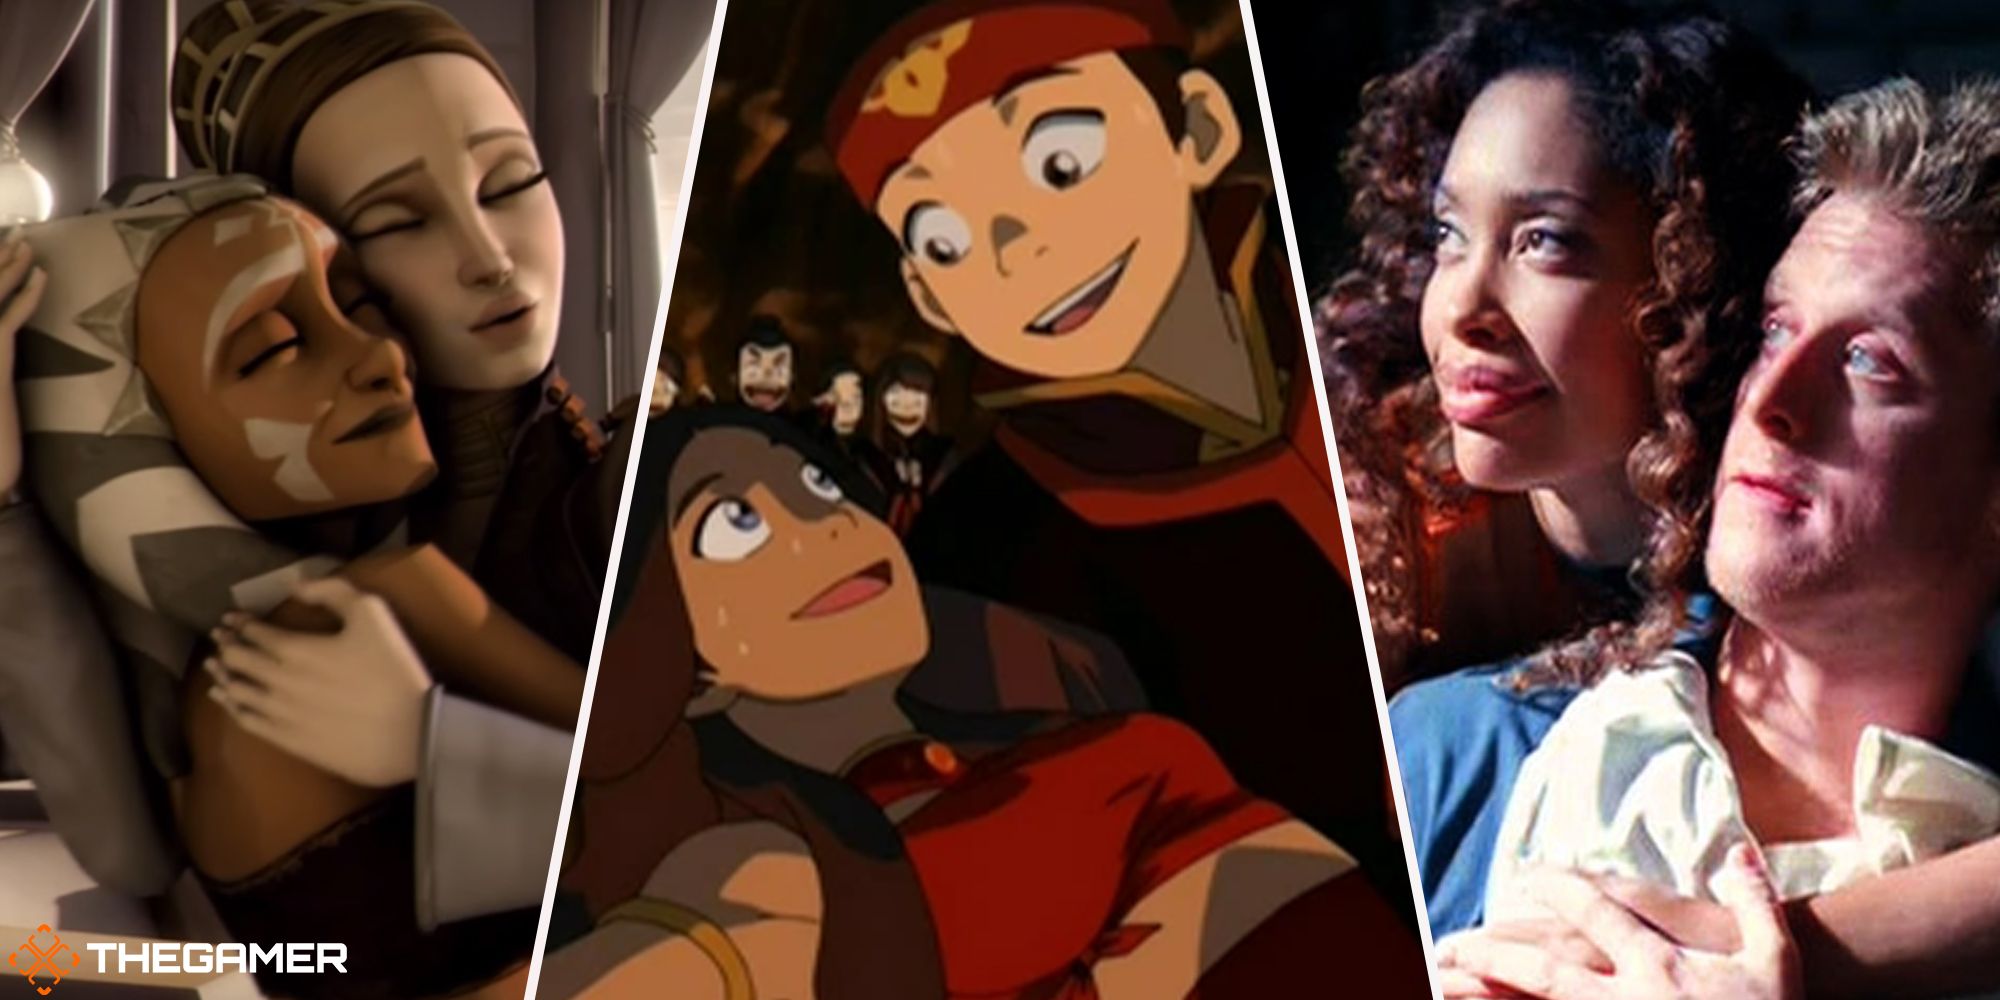 Various television shows' main characters - Ashoka and Padme from Star Wars The Clone Wars (left), Aang and Katara from Avatar the Last Airbender (middle), Wash and Zoe from Firefly (right)